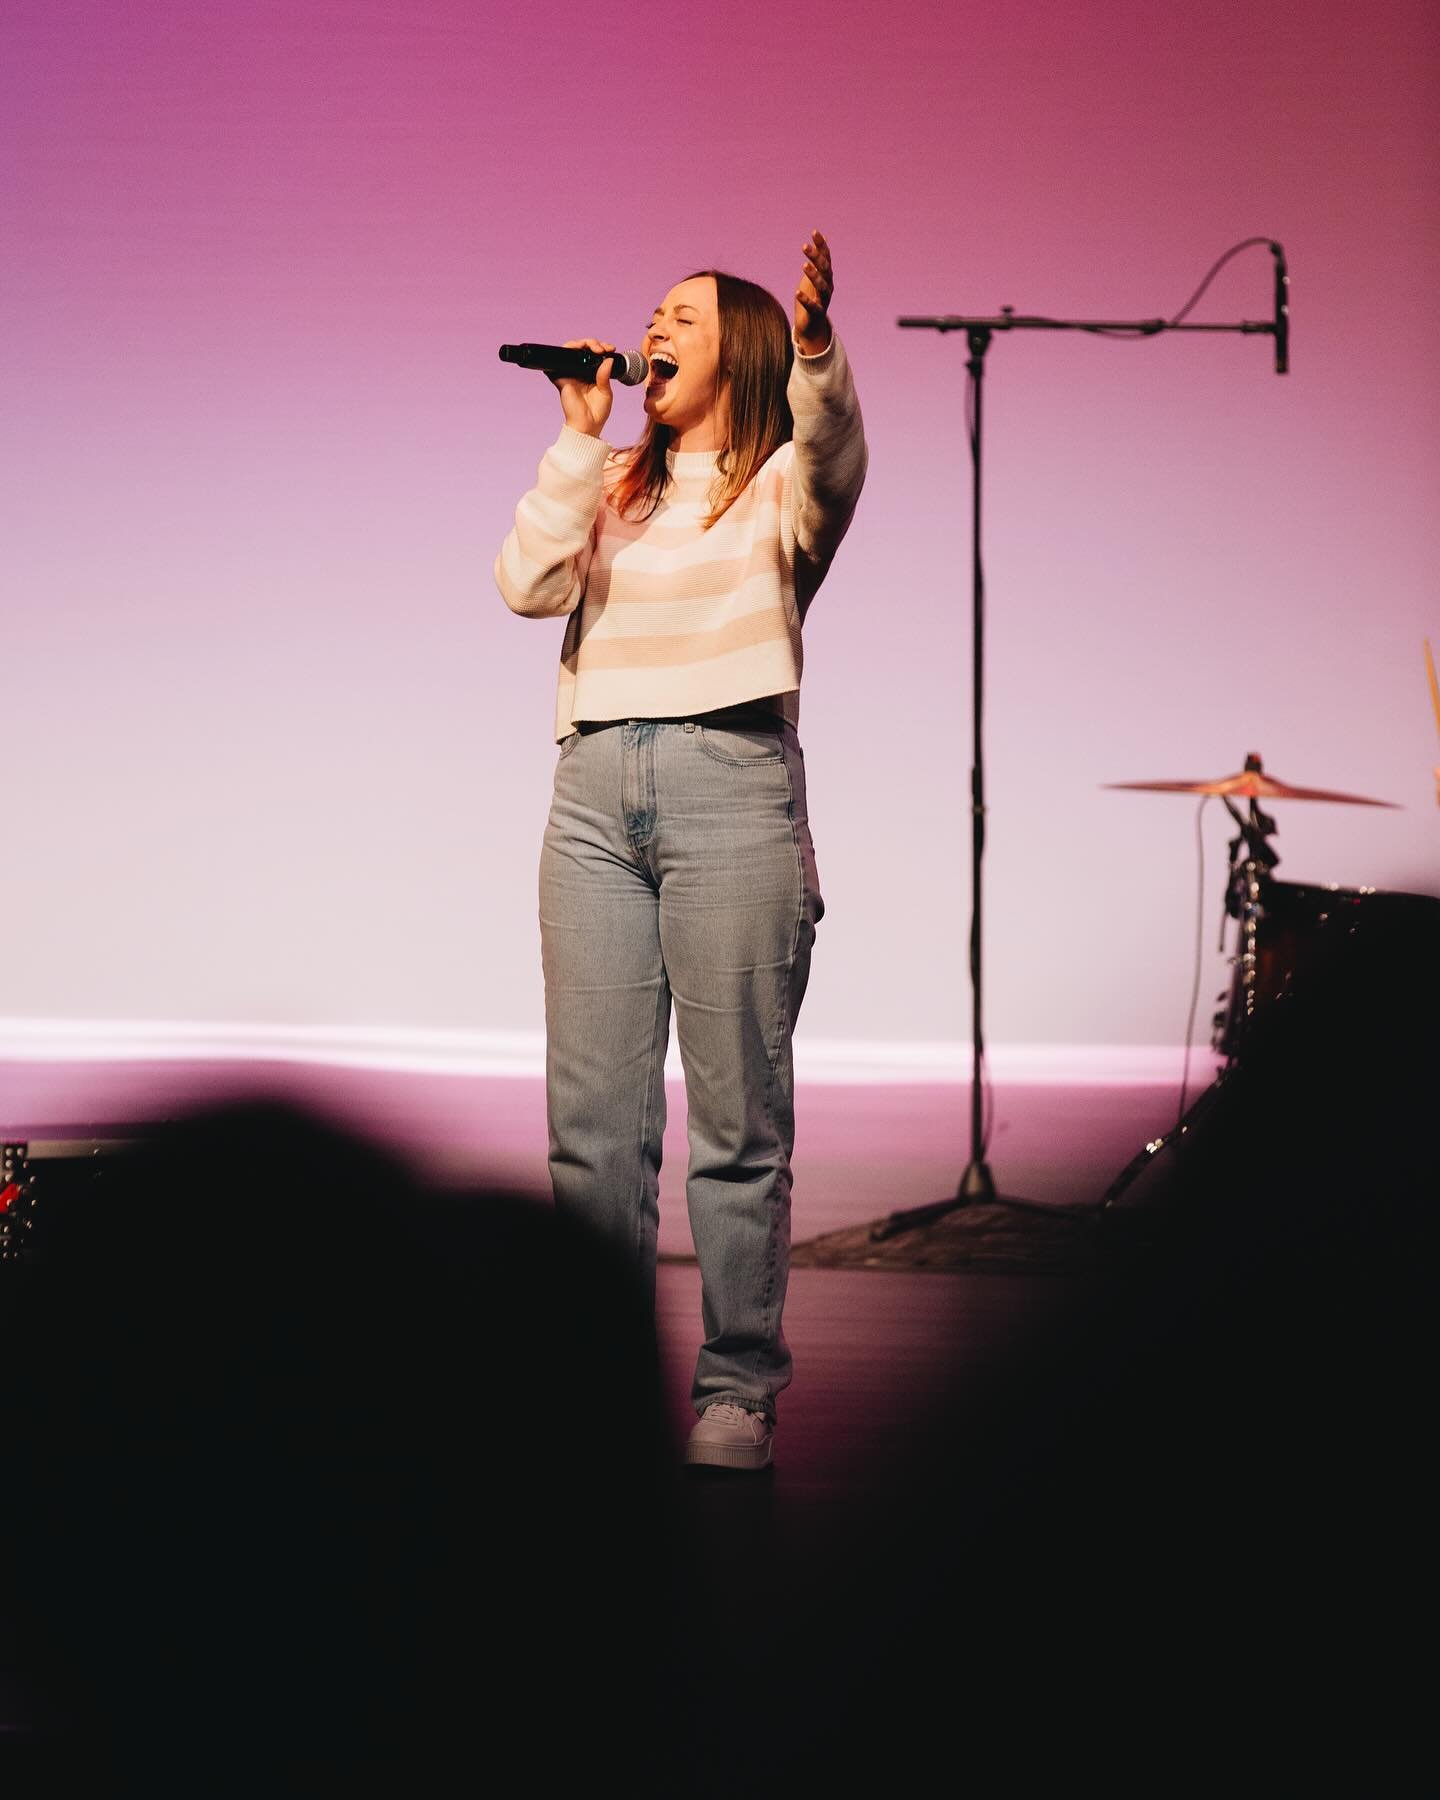 There is nothing better than Sundays with you church!⚡️

We kicked off our brand new series &ldquo;Moving Past Anxiety&rdquo; and God met us in a tangible way! The Lord is near so therefore I will not fear. 

Jesus is greater than anxiety.
Jesus is s